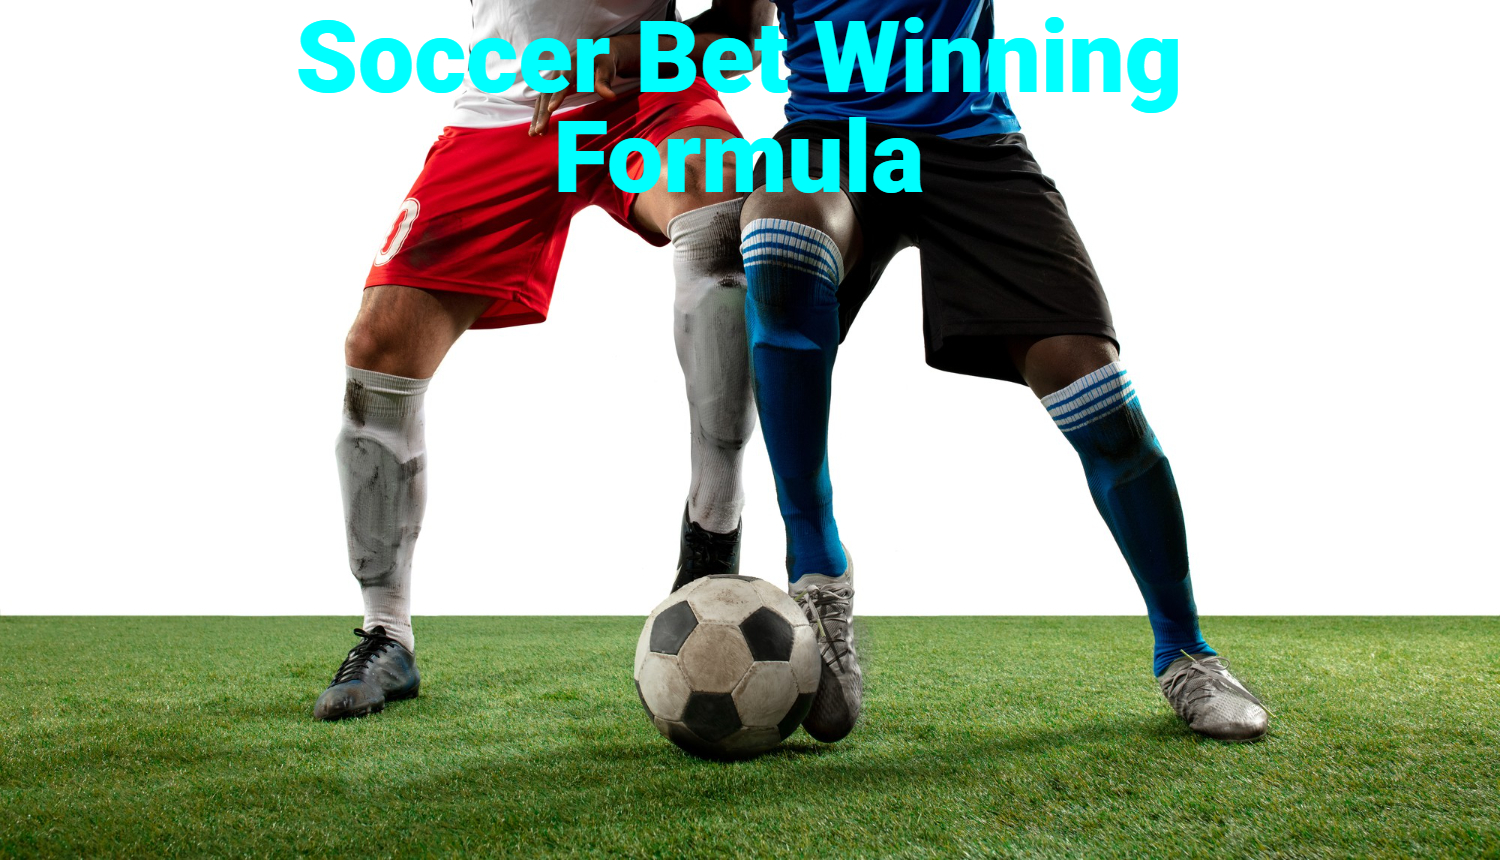 Soccer Bet Winning Formula - How To Maximize Your Profits With A Winning Betting Strategy